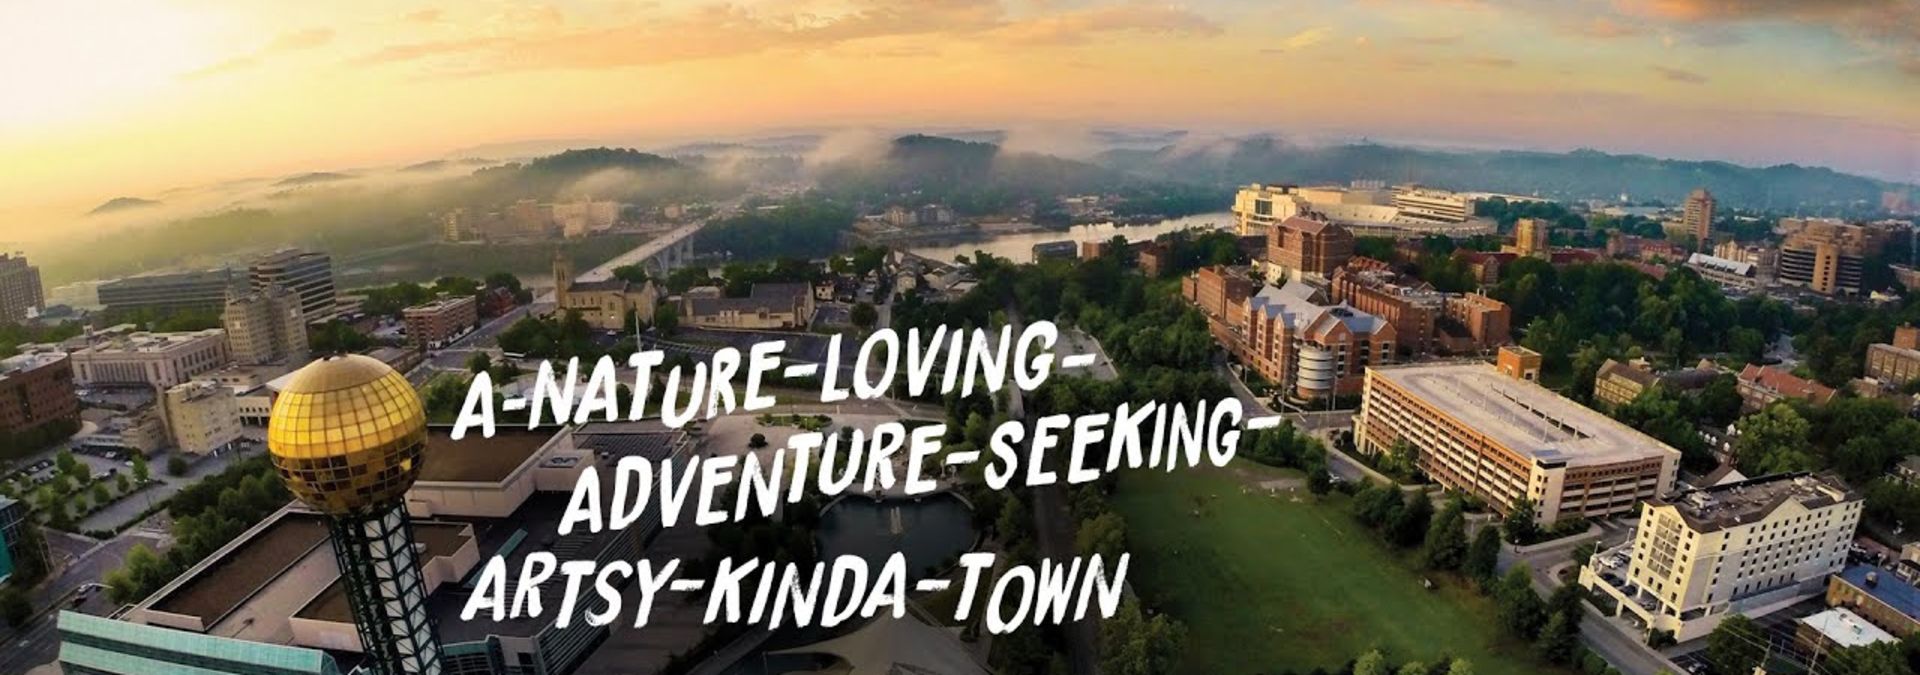 Visit Knoxville Tn Hotels Attractions Restaurants Shops